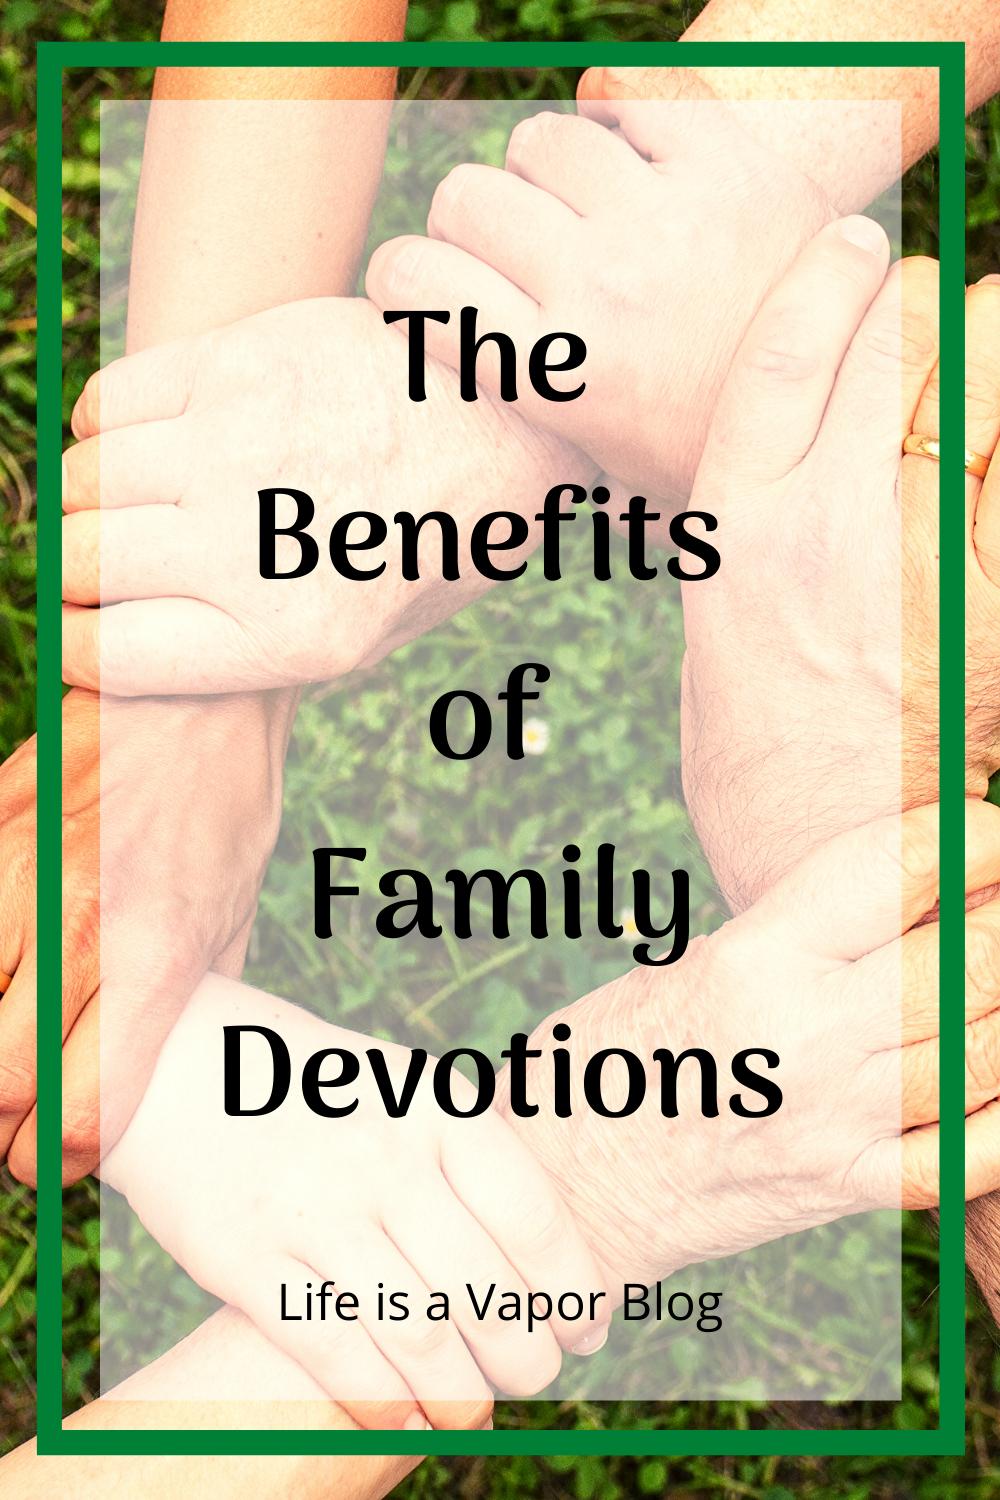 The Benefits of Family Devotions